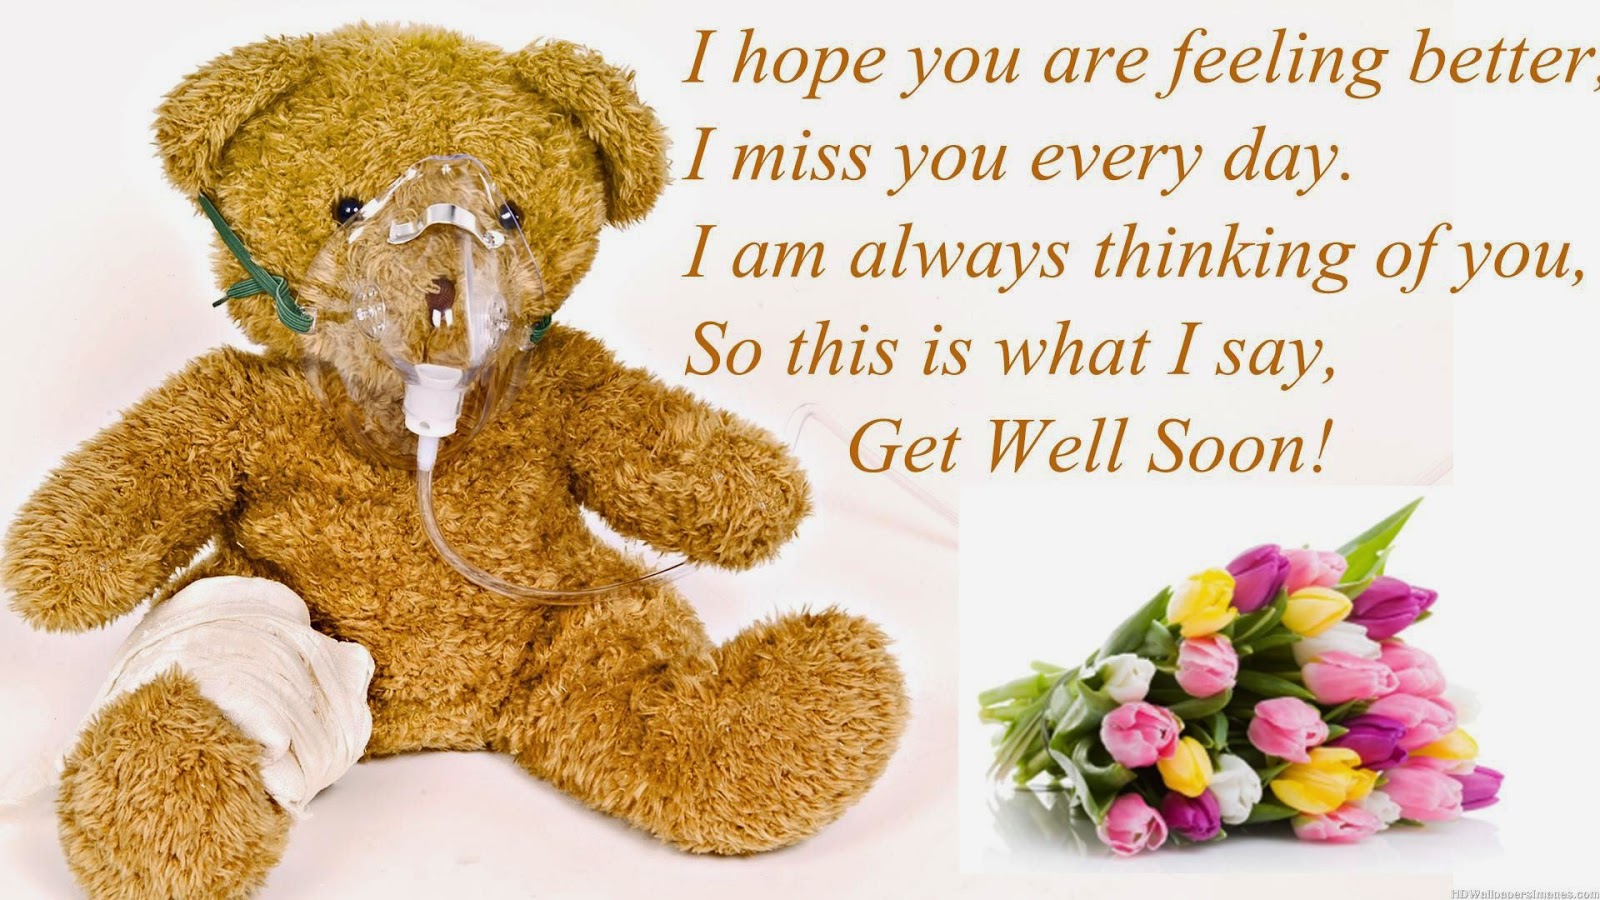 GET WELL SOON MESSAGES, GET WELL SOON WISHES, GET WELL SOON WORDS - Beautiful Messages1600 x 900